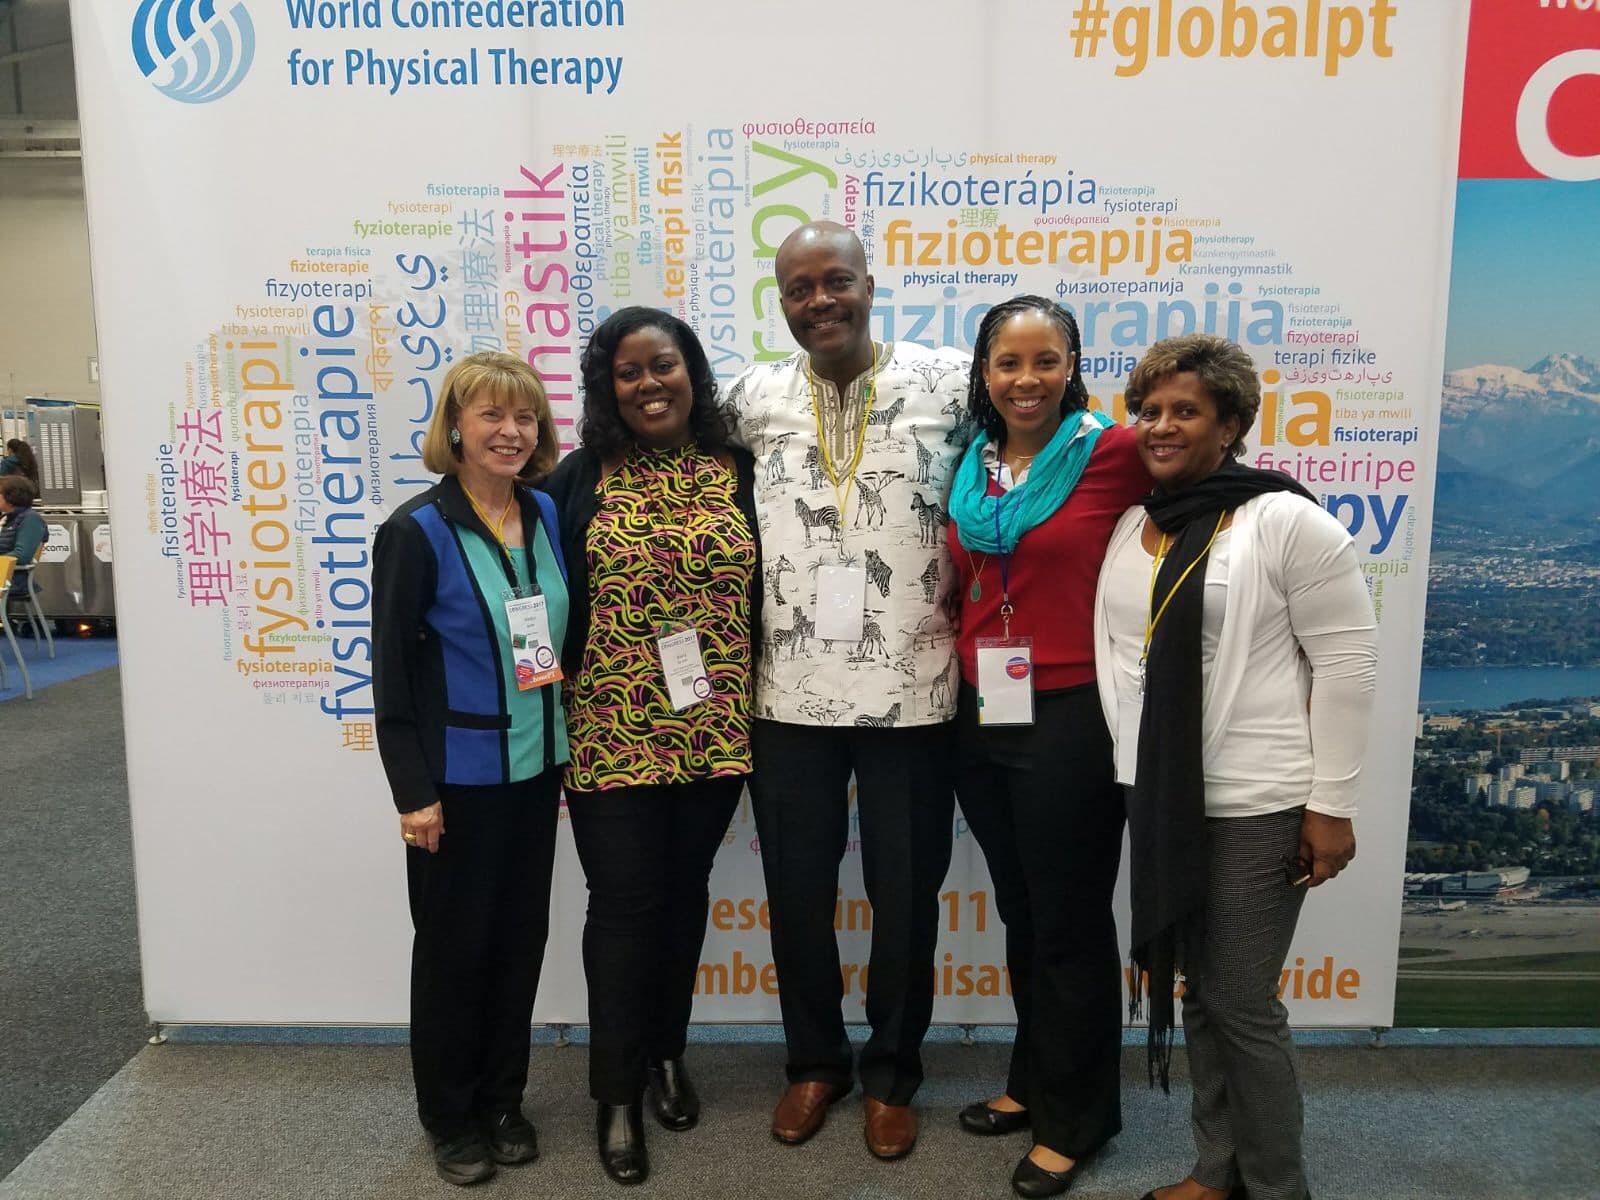 FEATURED ARTICLE: Dr. Jelaine James PT, DPT Attends World Confederation for Physical Therapy Congress 2017